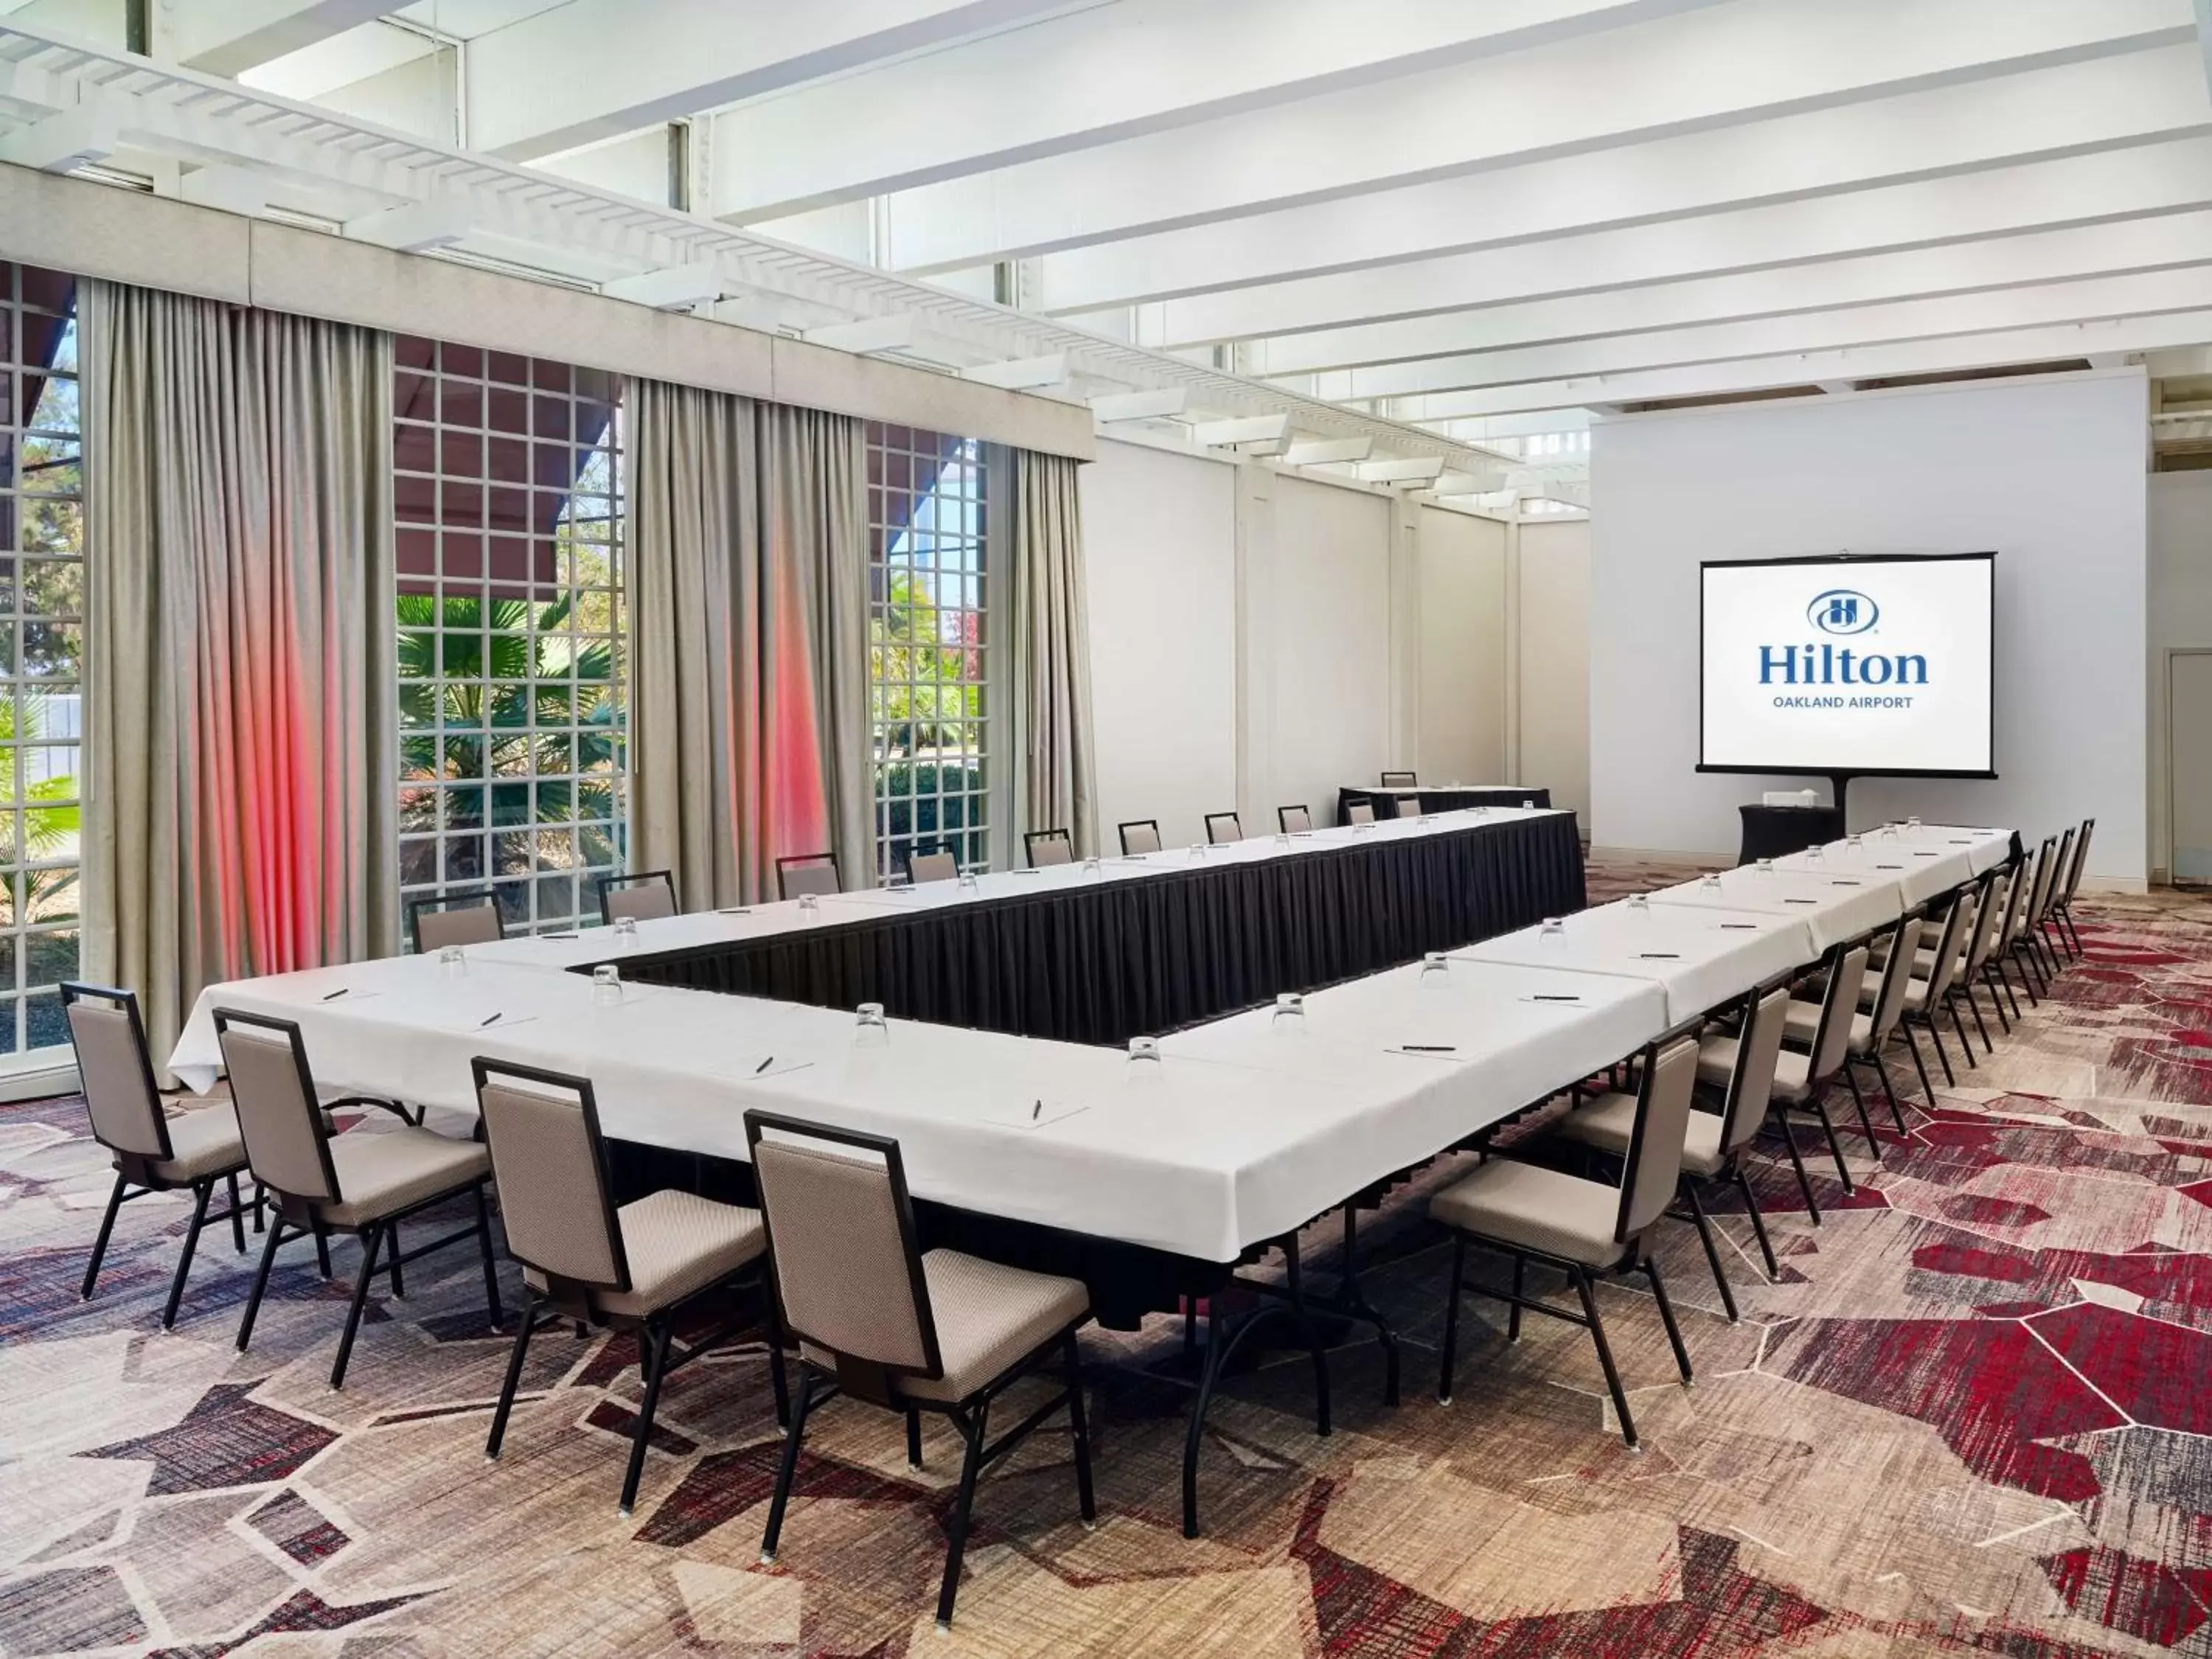 Meeting/conference room in Hilton Oakland Airport